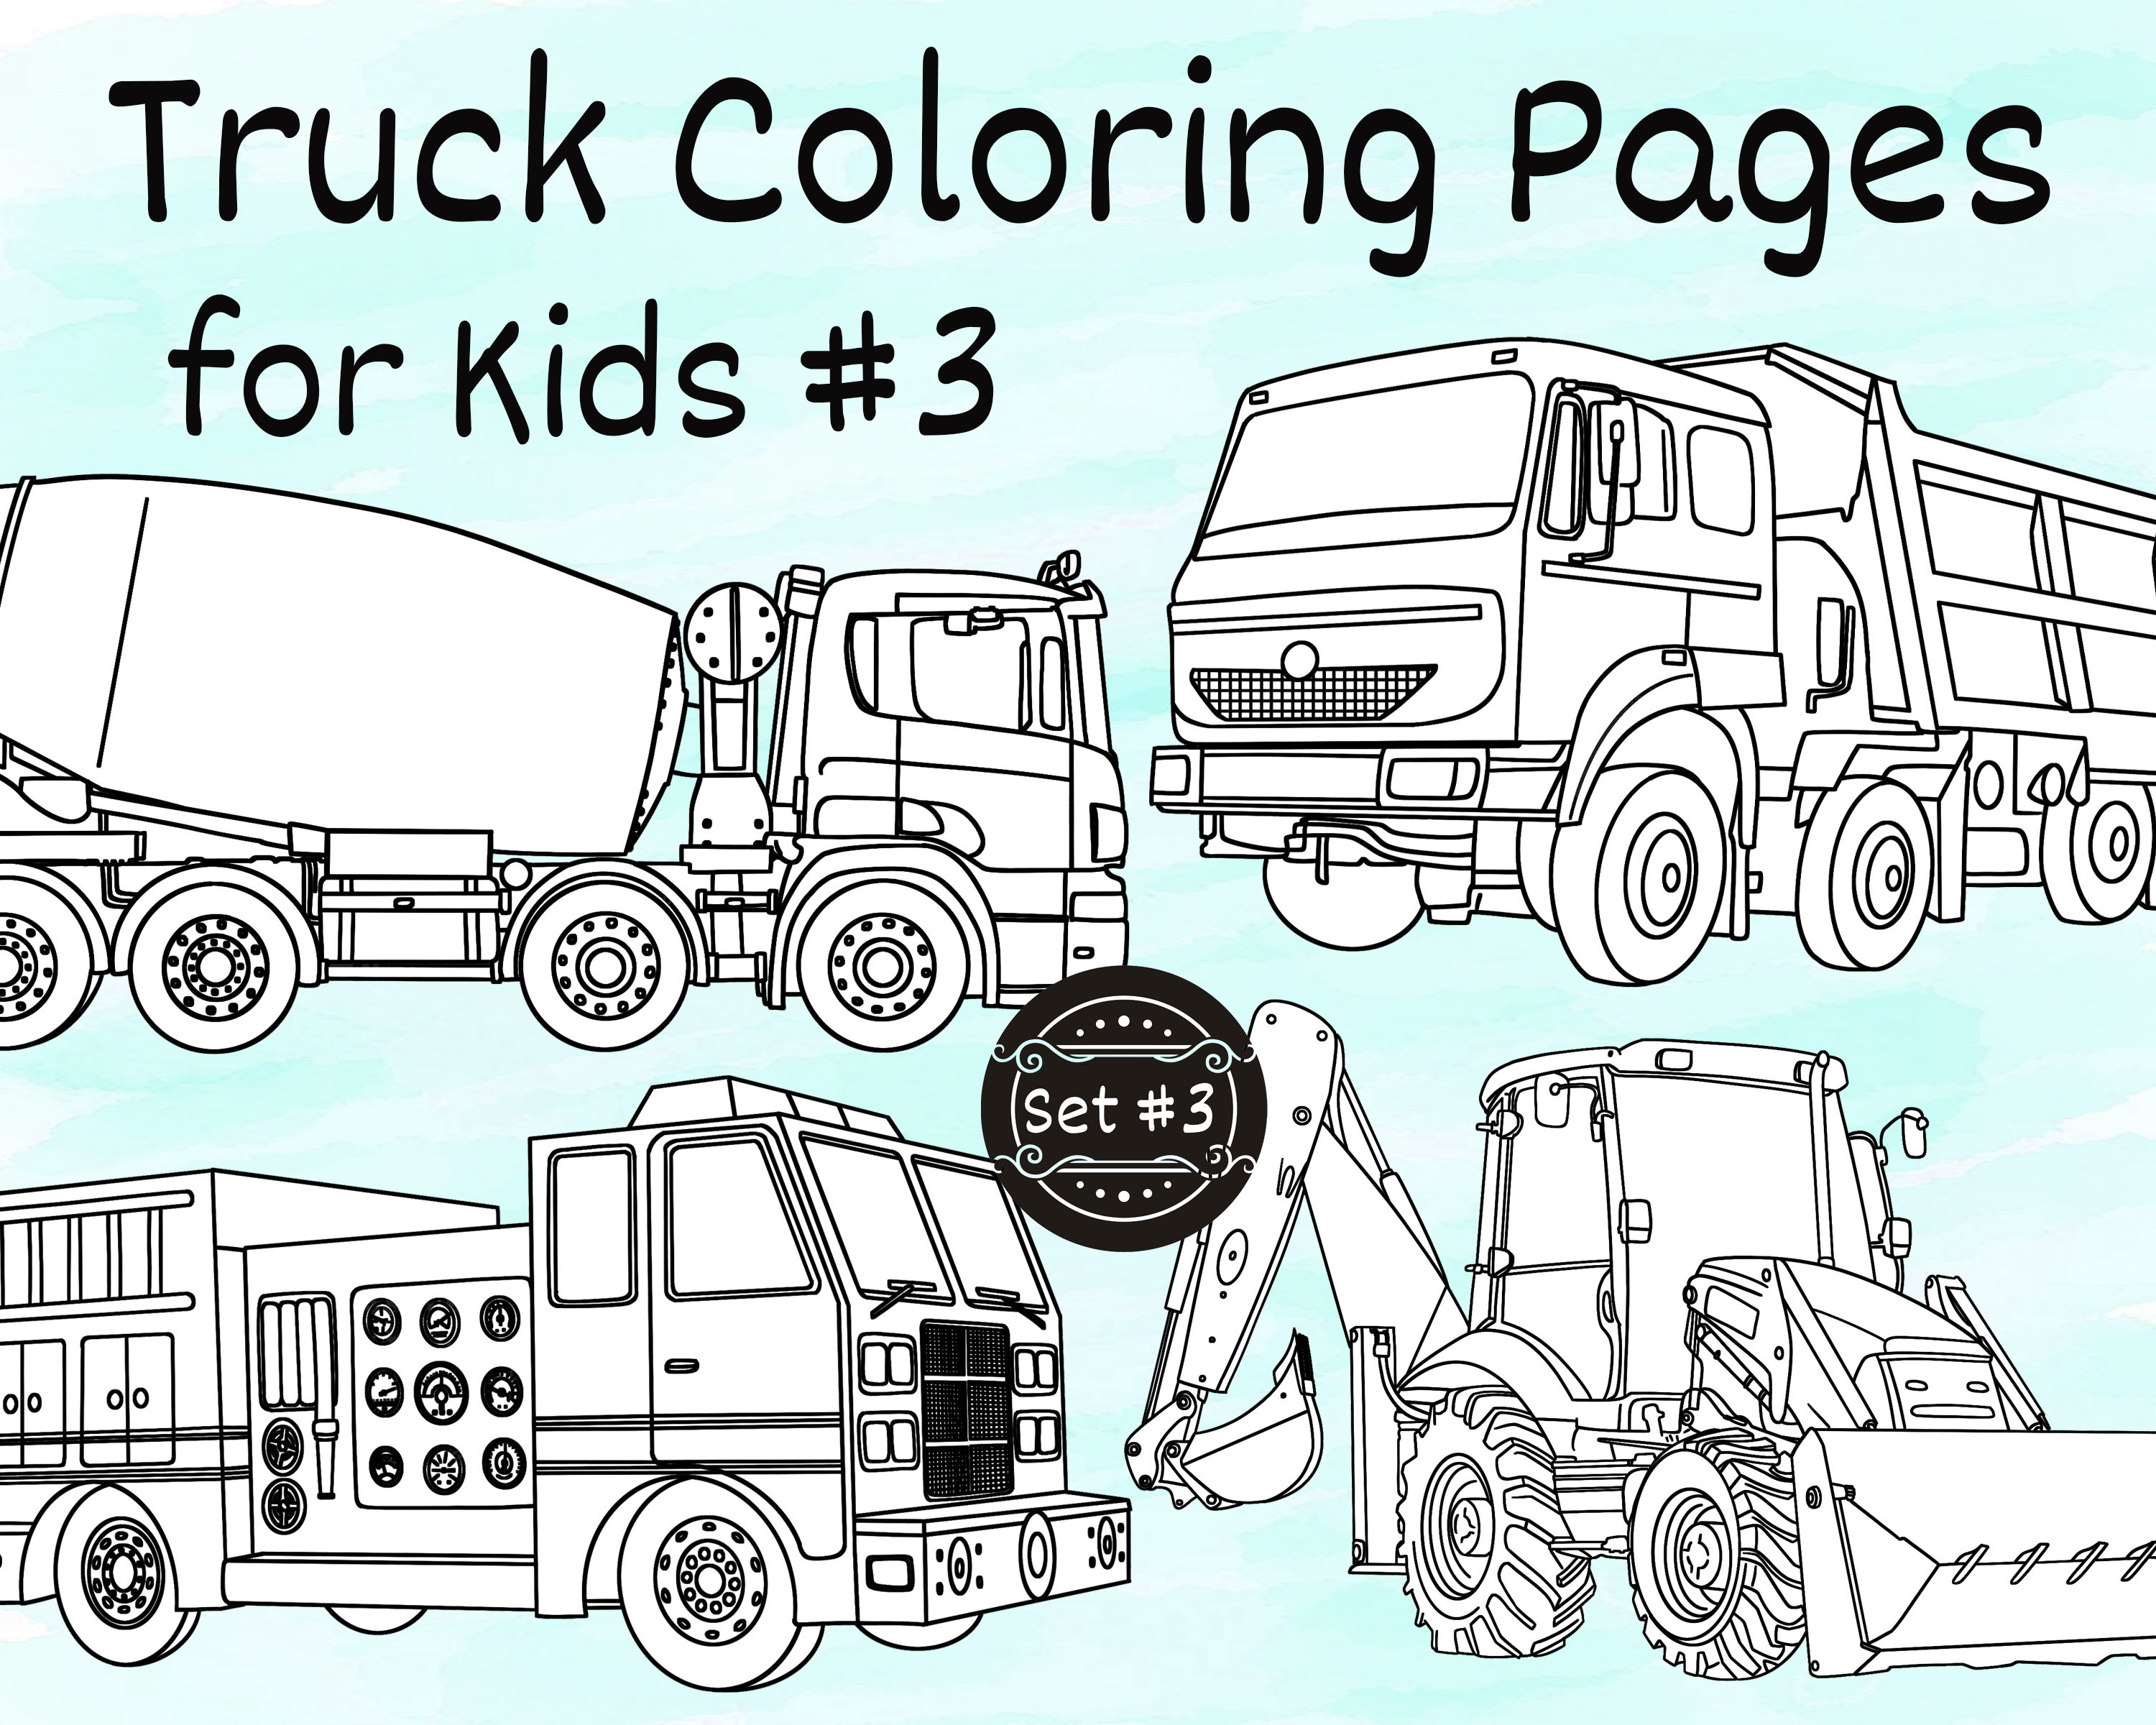 Truck coloring pages for kids printable coloring pages trucks for coloring coloring for pages for kids to print pdf set